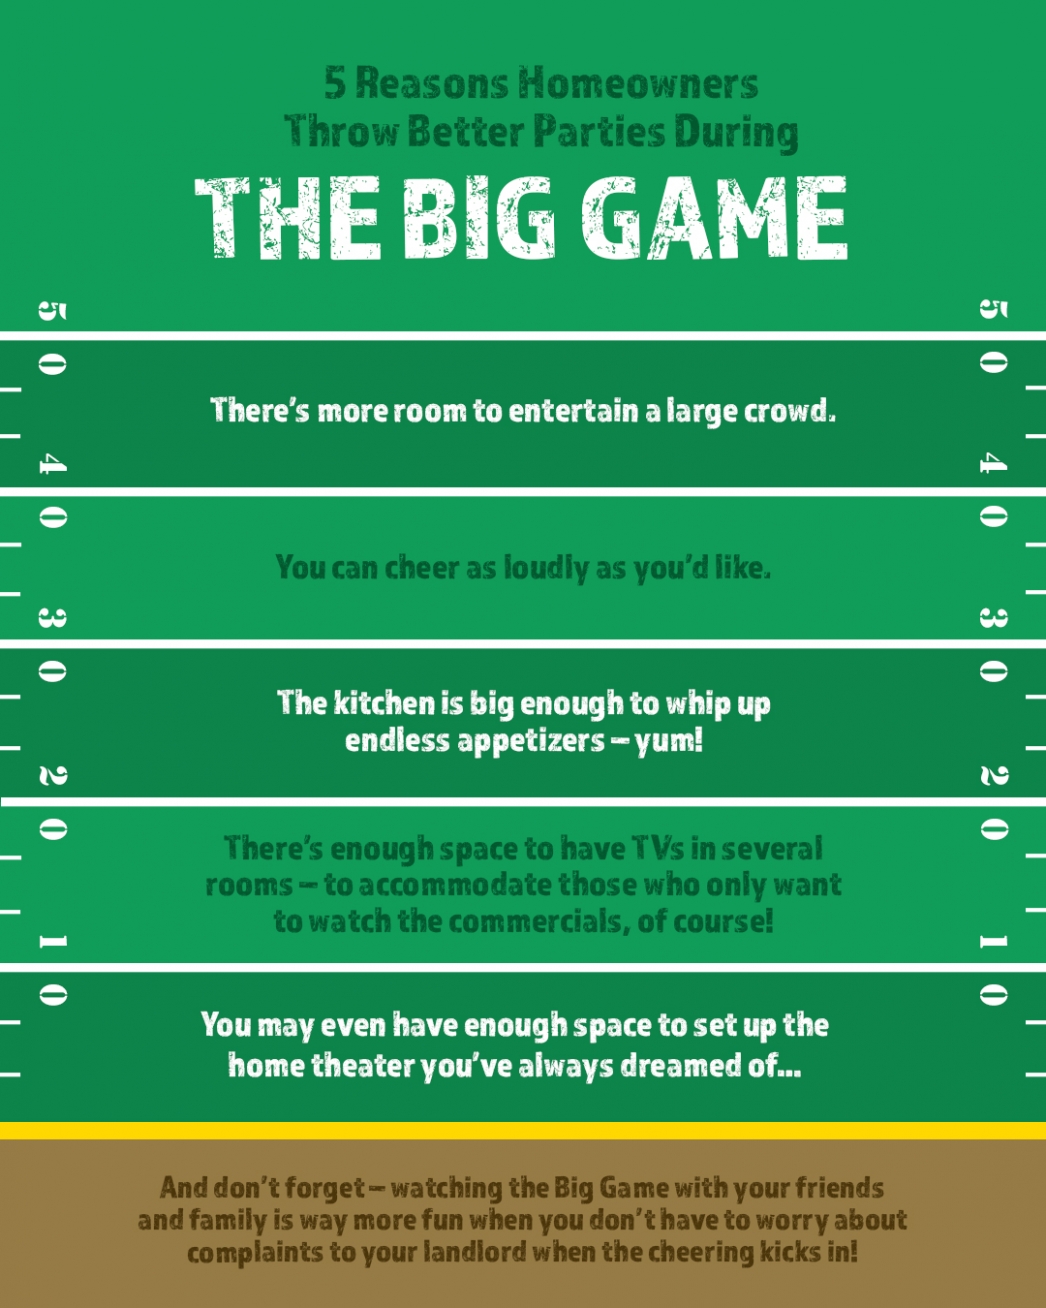 5 Reasons Homeowners Throw Better Parties During the Big Game [INFOGRAPHIC] | MyKCM